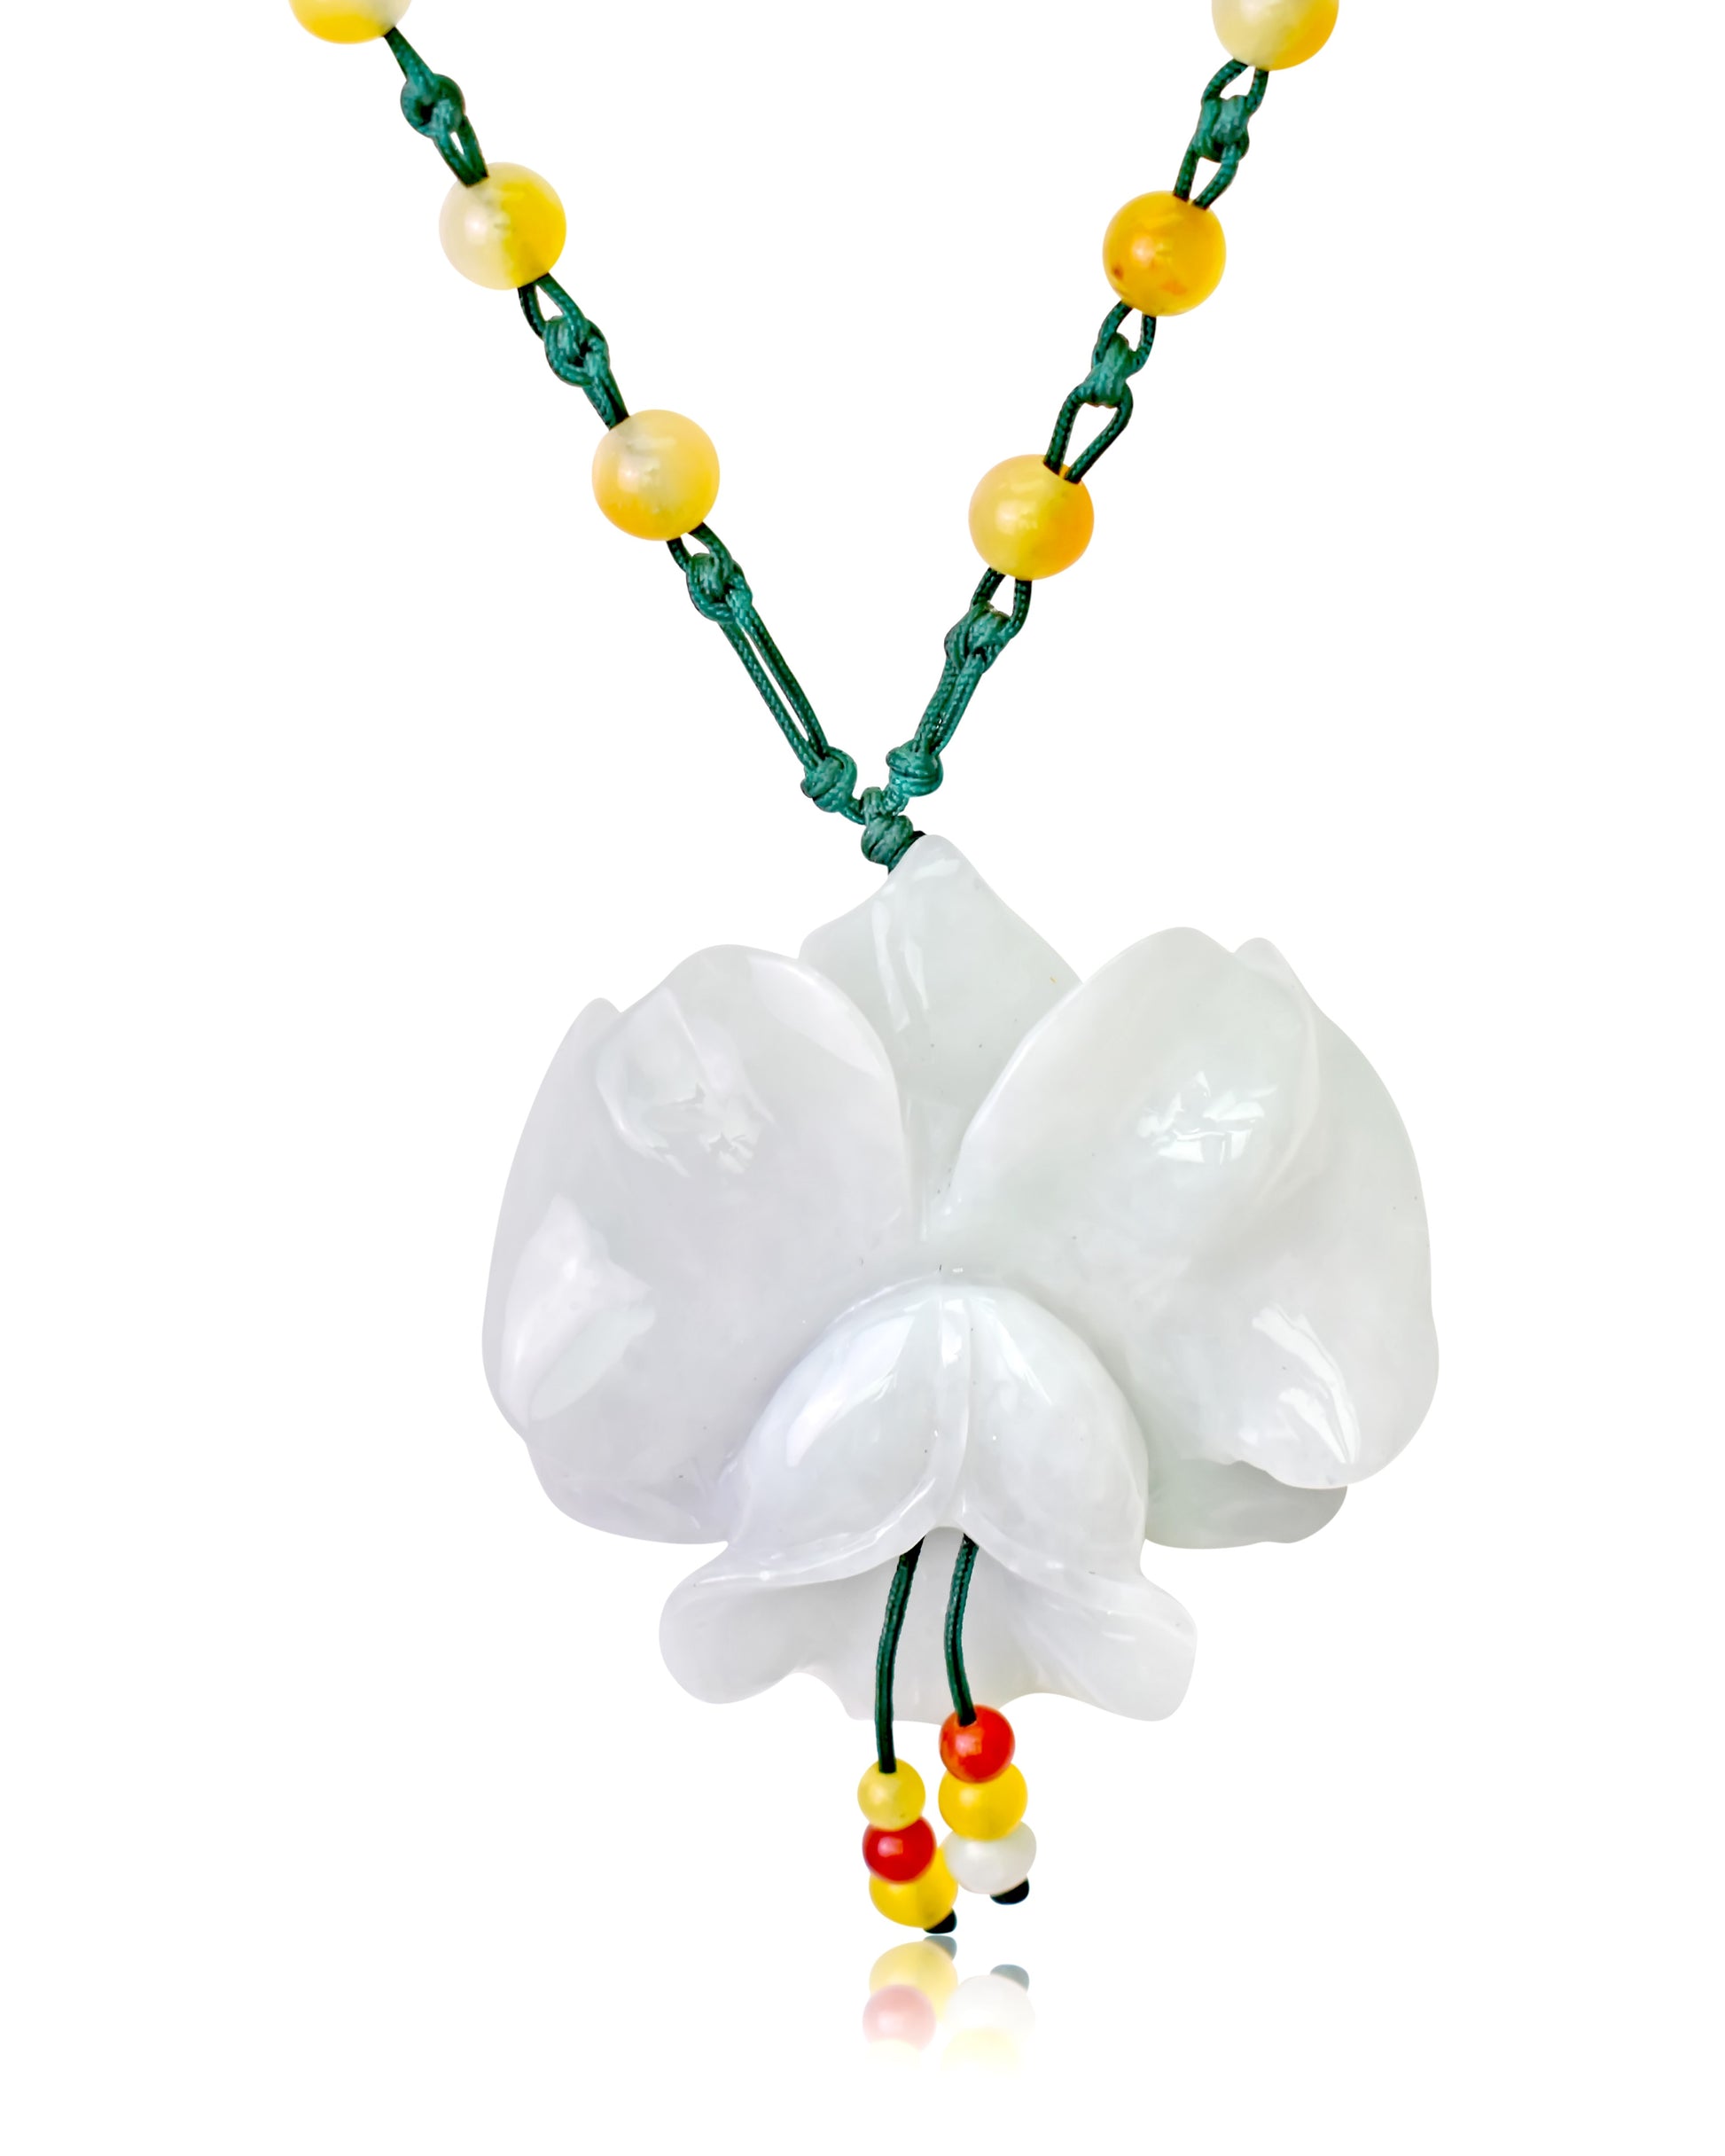 Shine Bright with Orchid Floral Jade Necklace Pendant